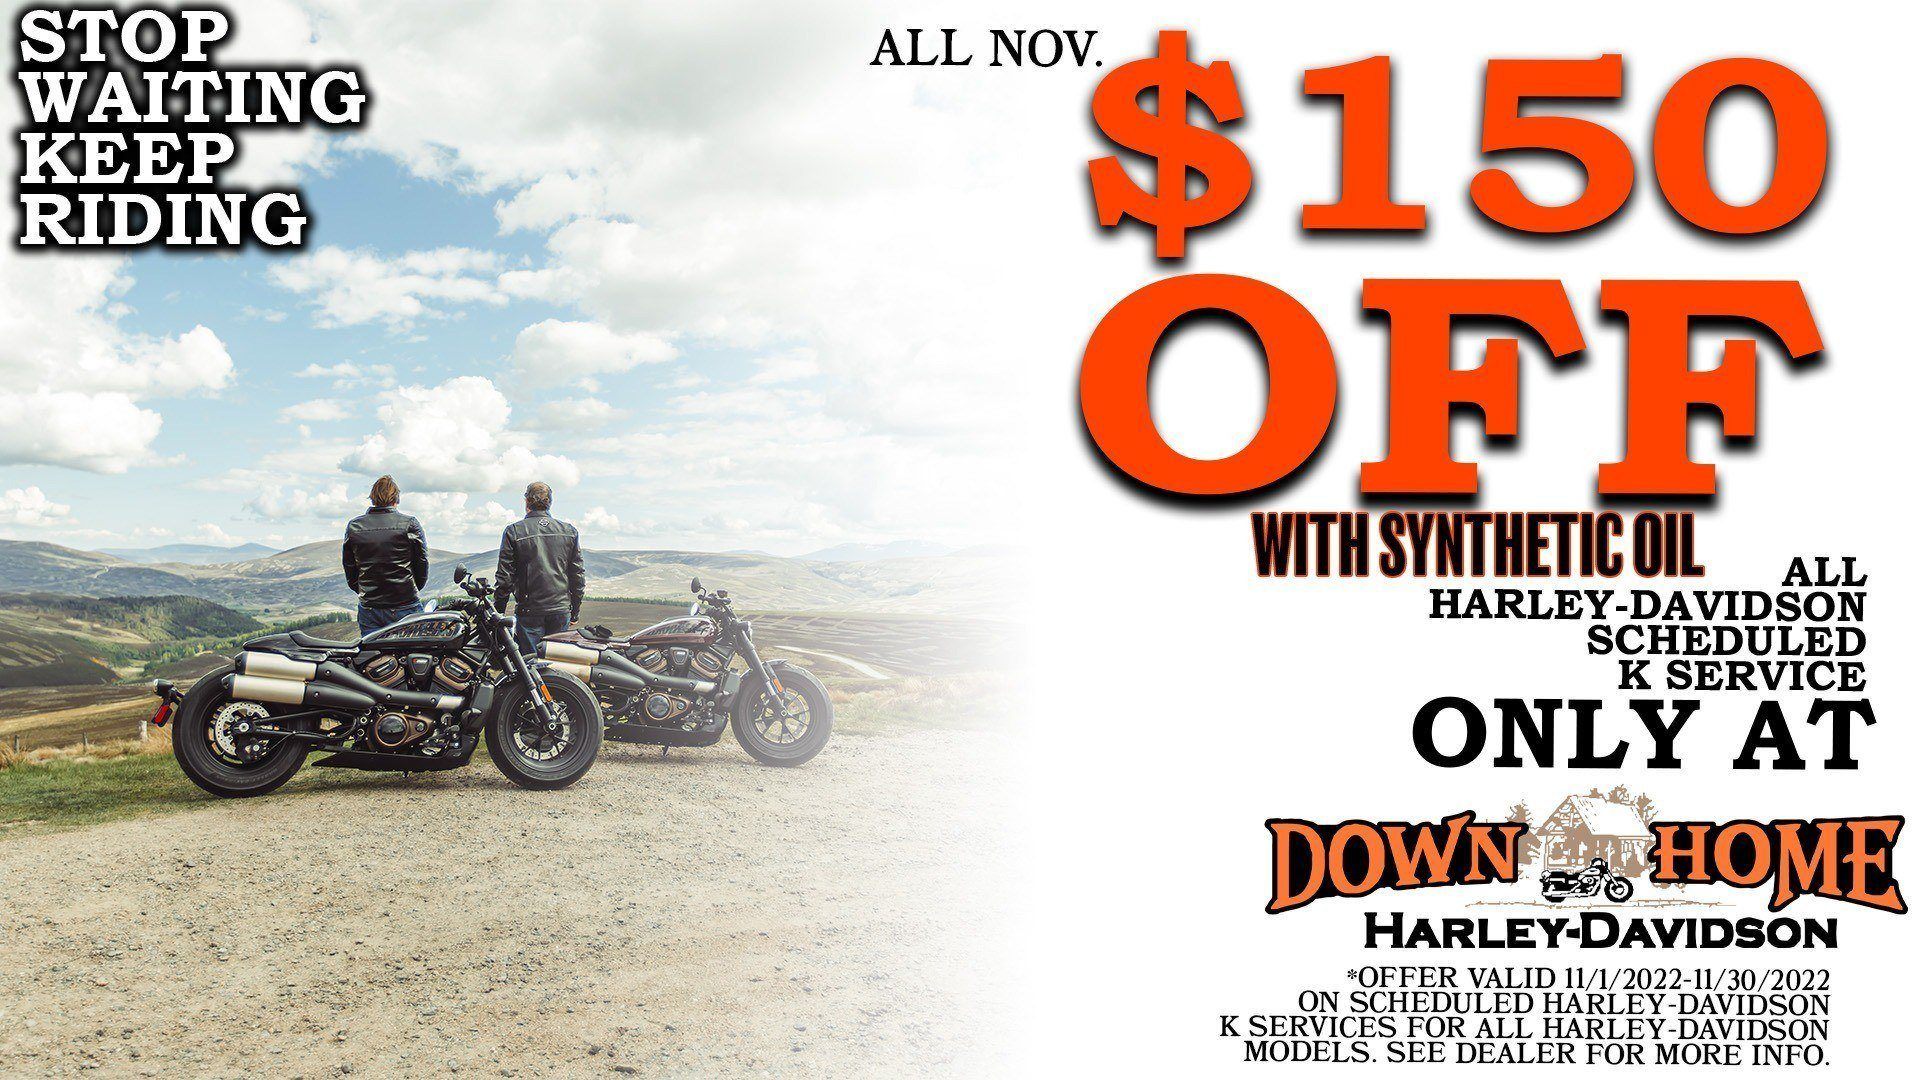 $150 off with synthetic oil on all H-D scheduled K Service